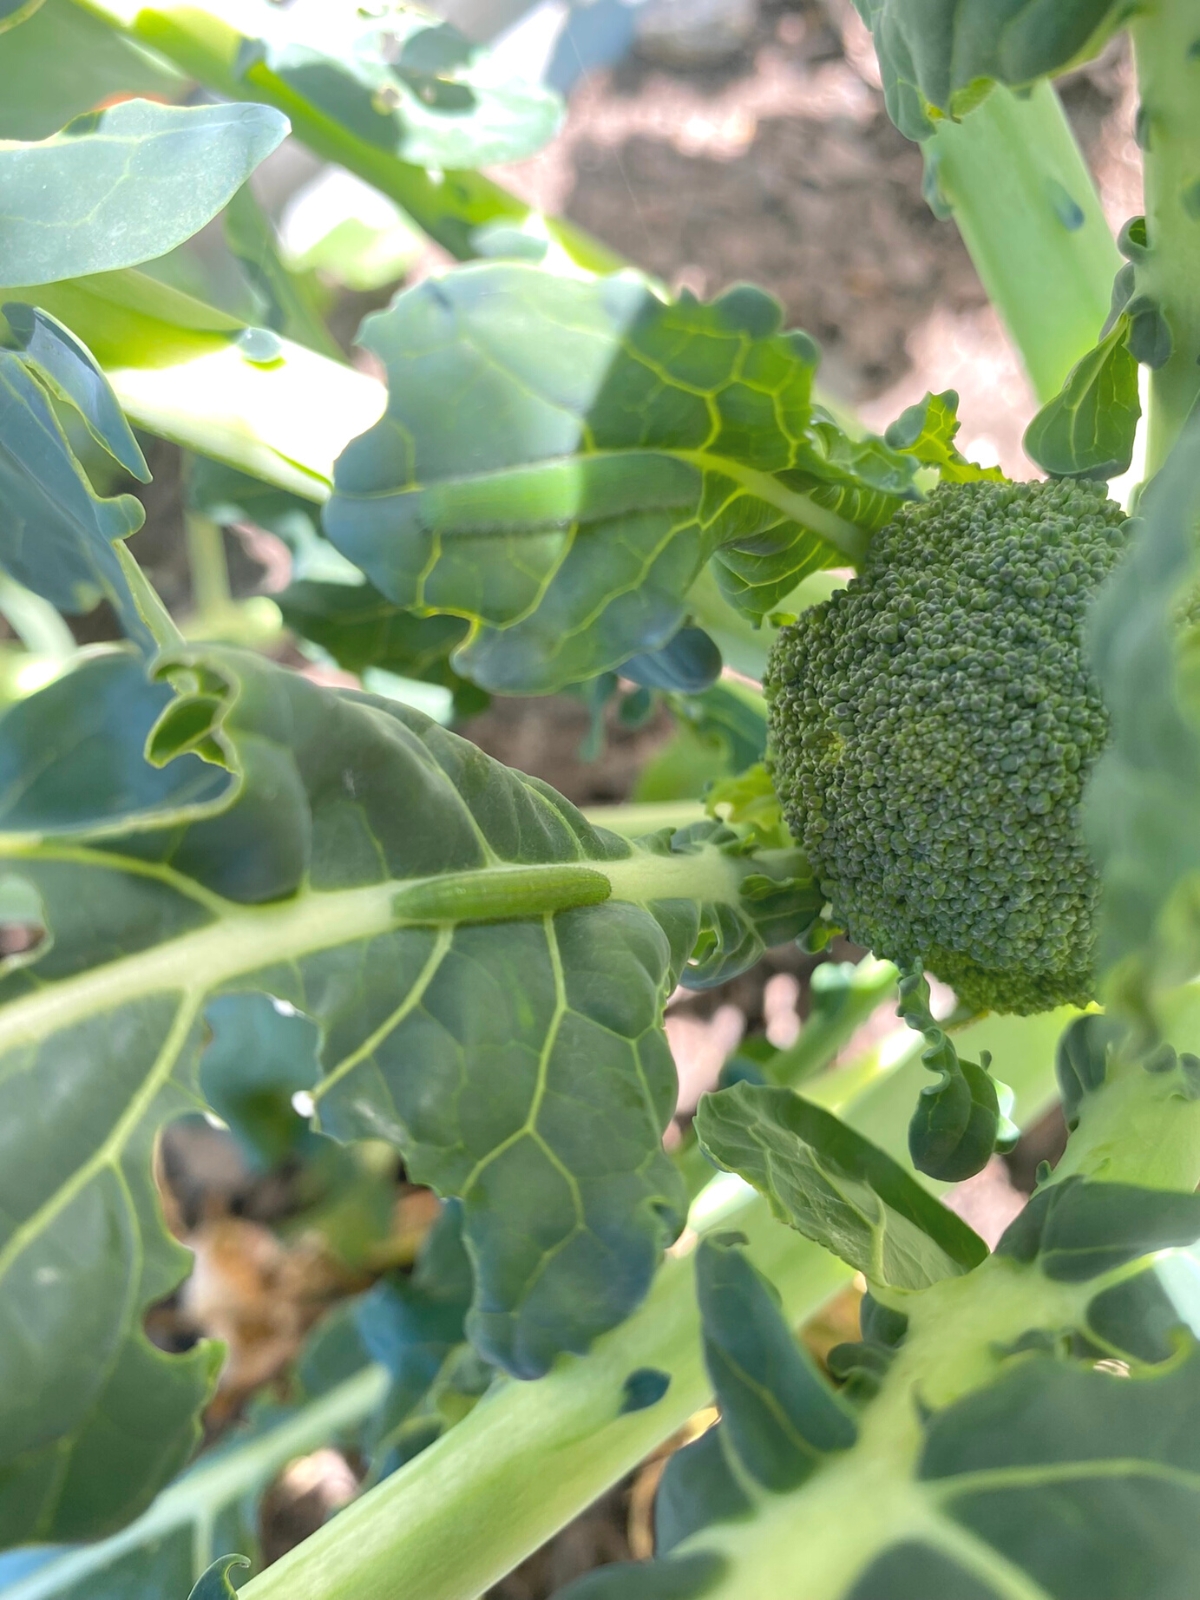 cabbage worms on broccoli plant